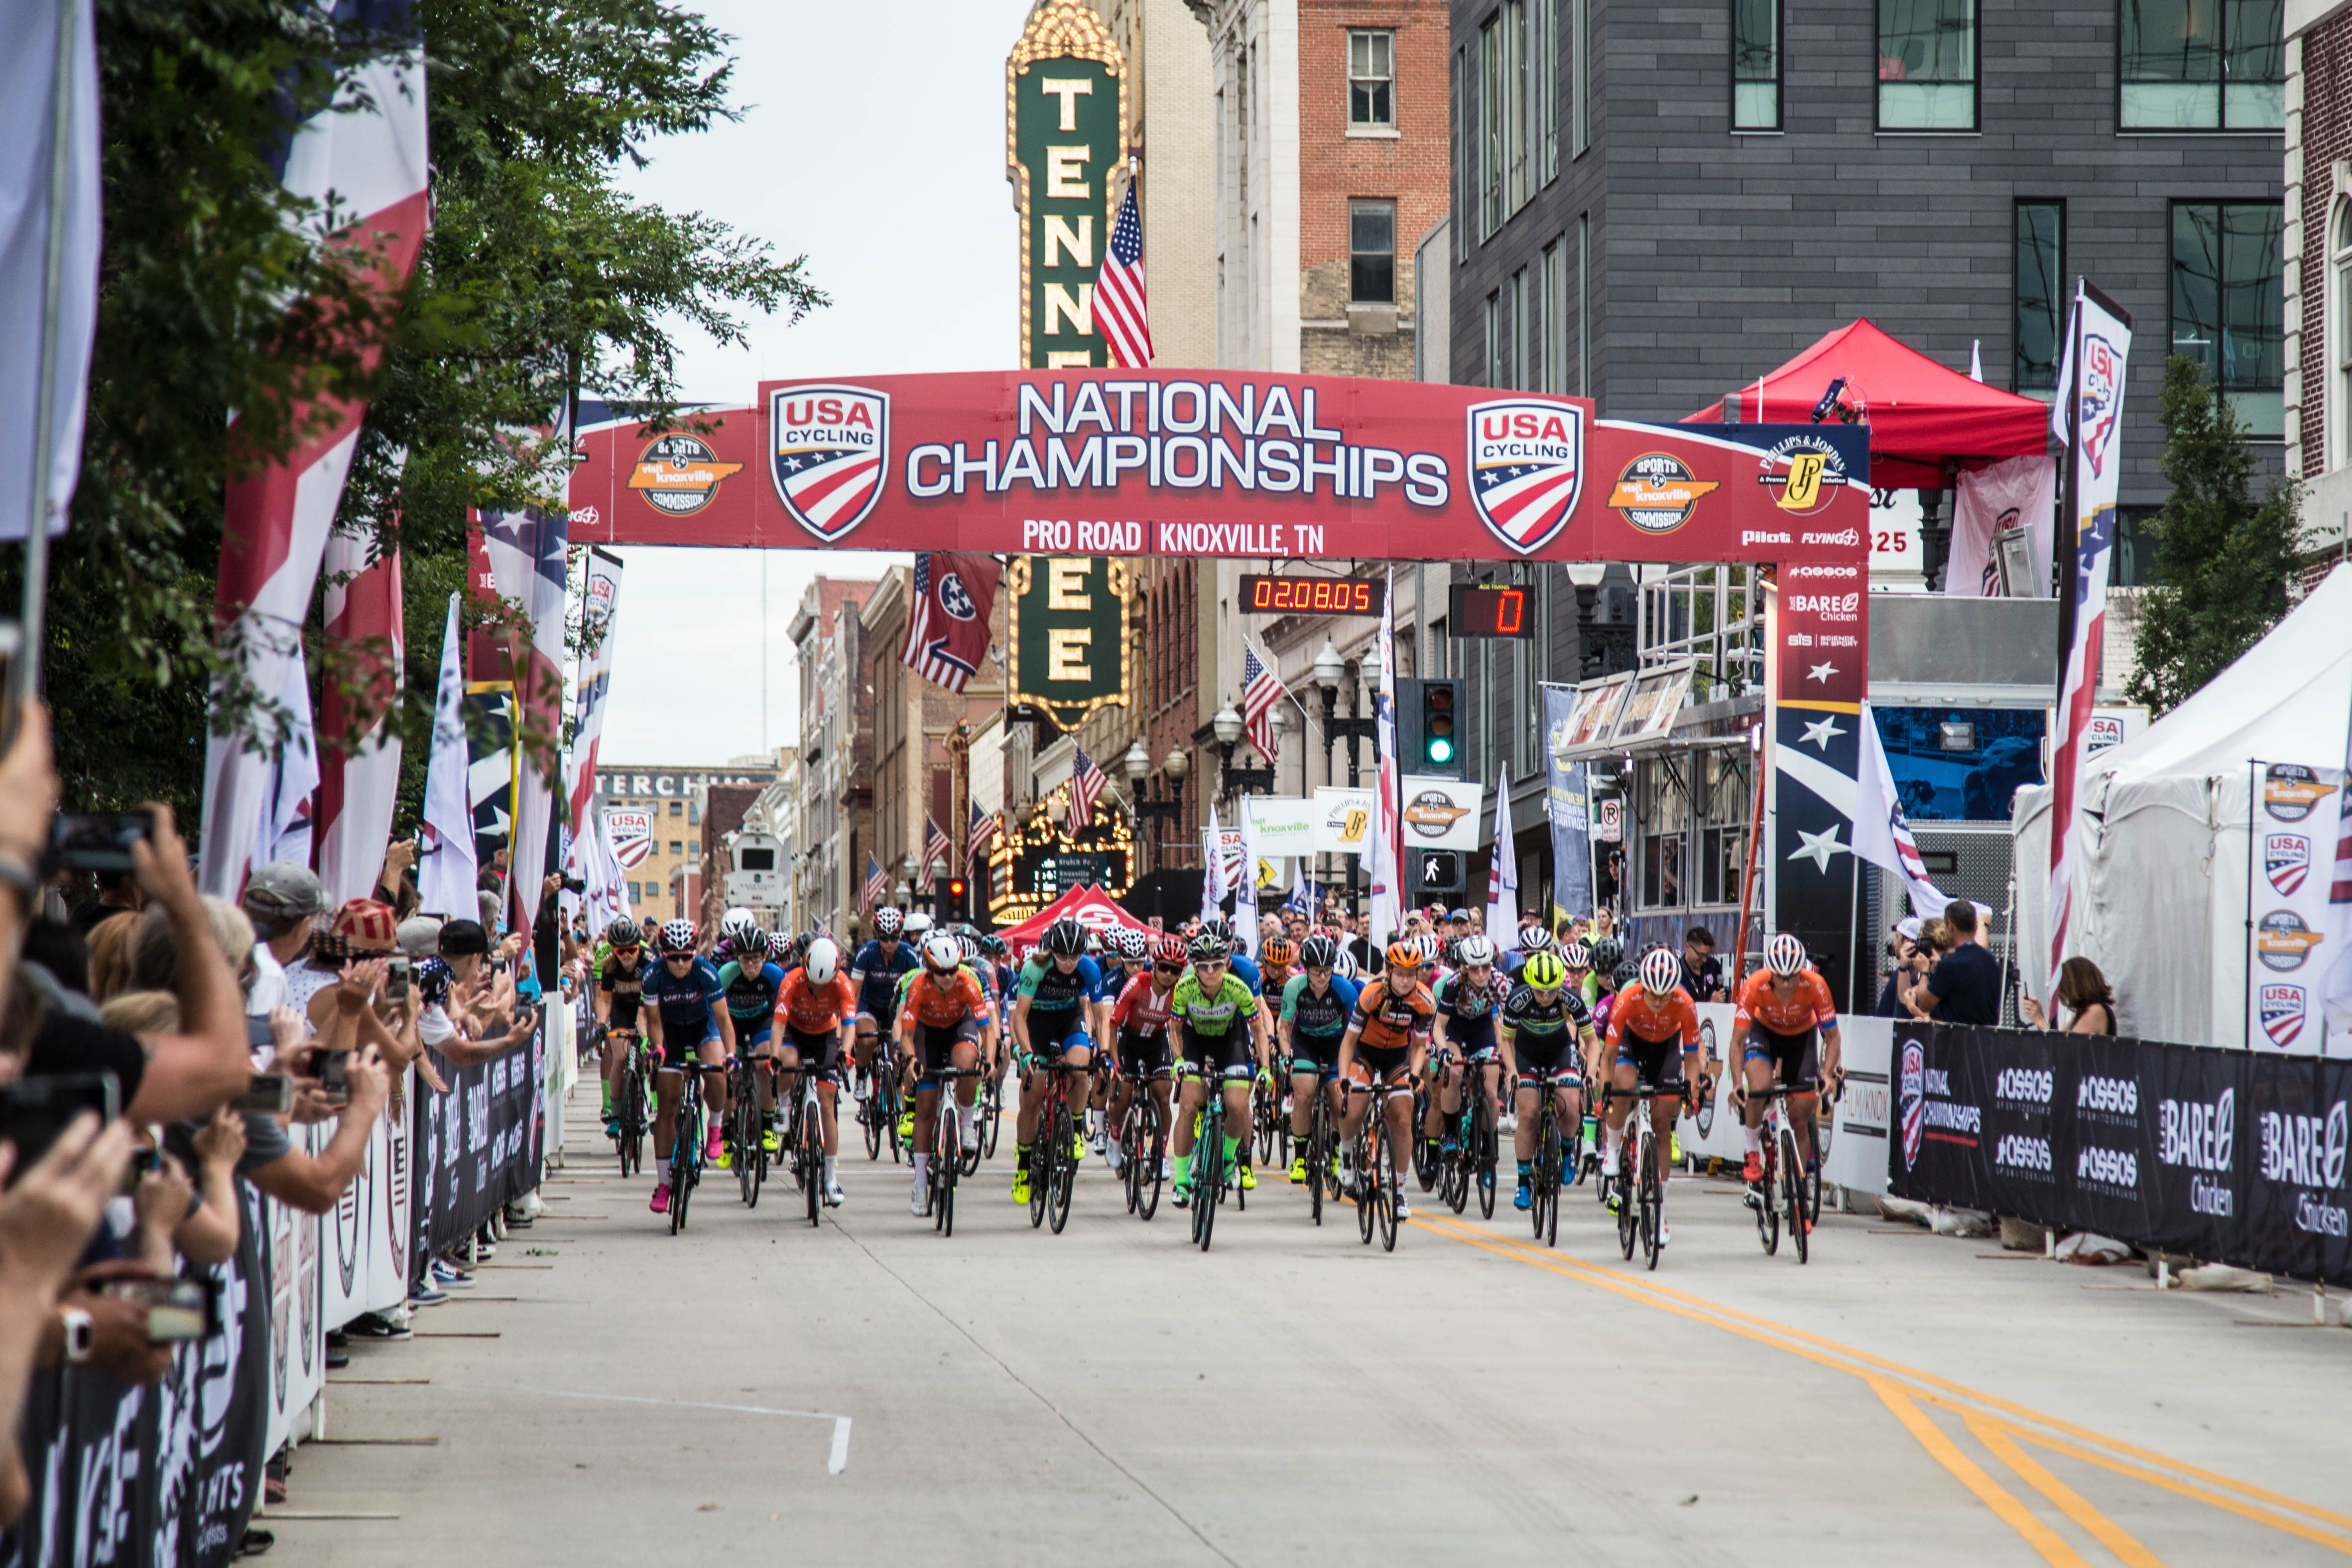 A Great Weekend of Pro Cycling in Knoxville! Inside of Knoxville